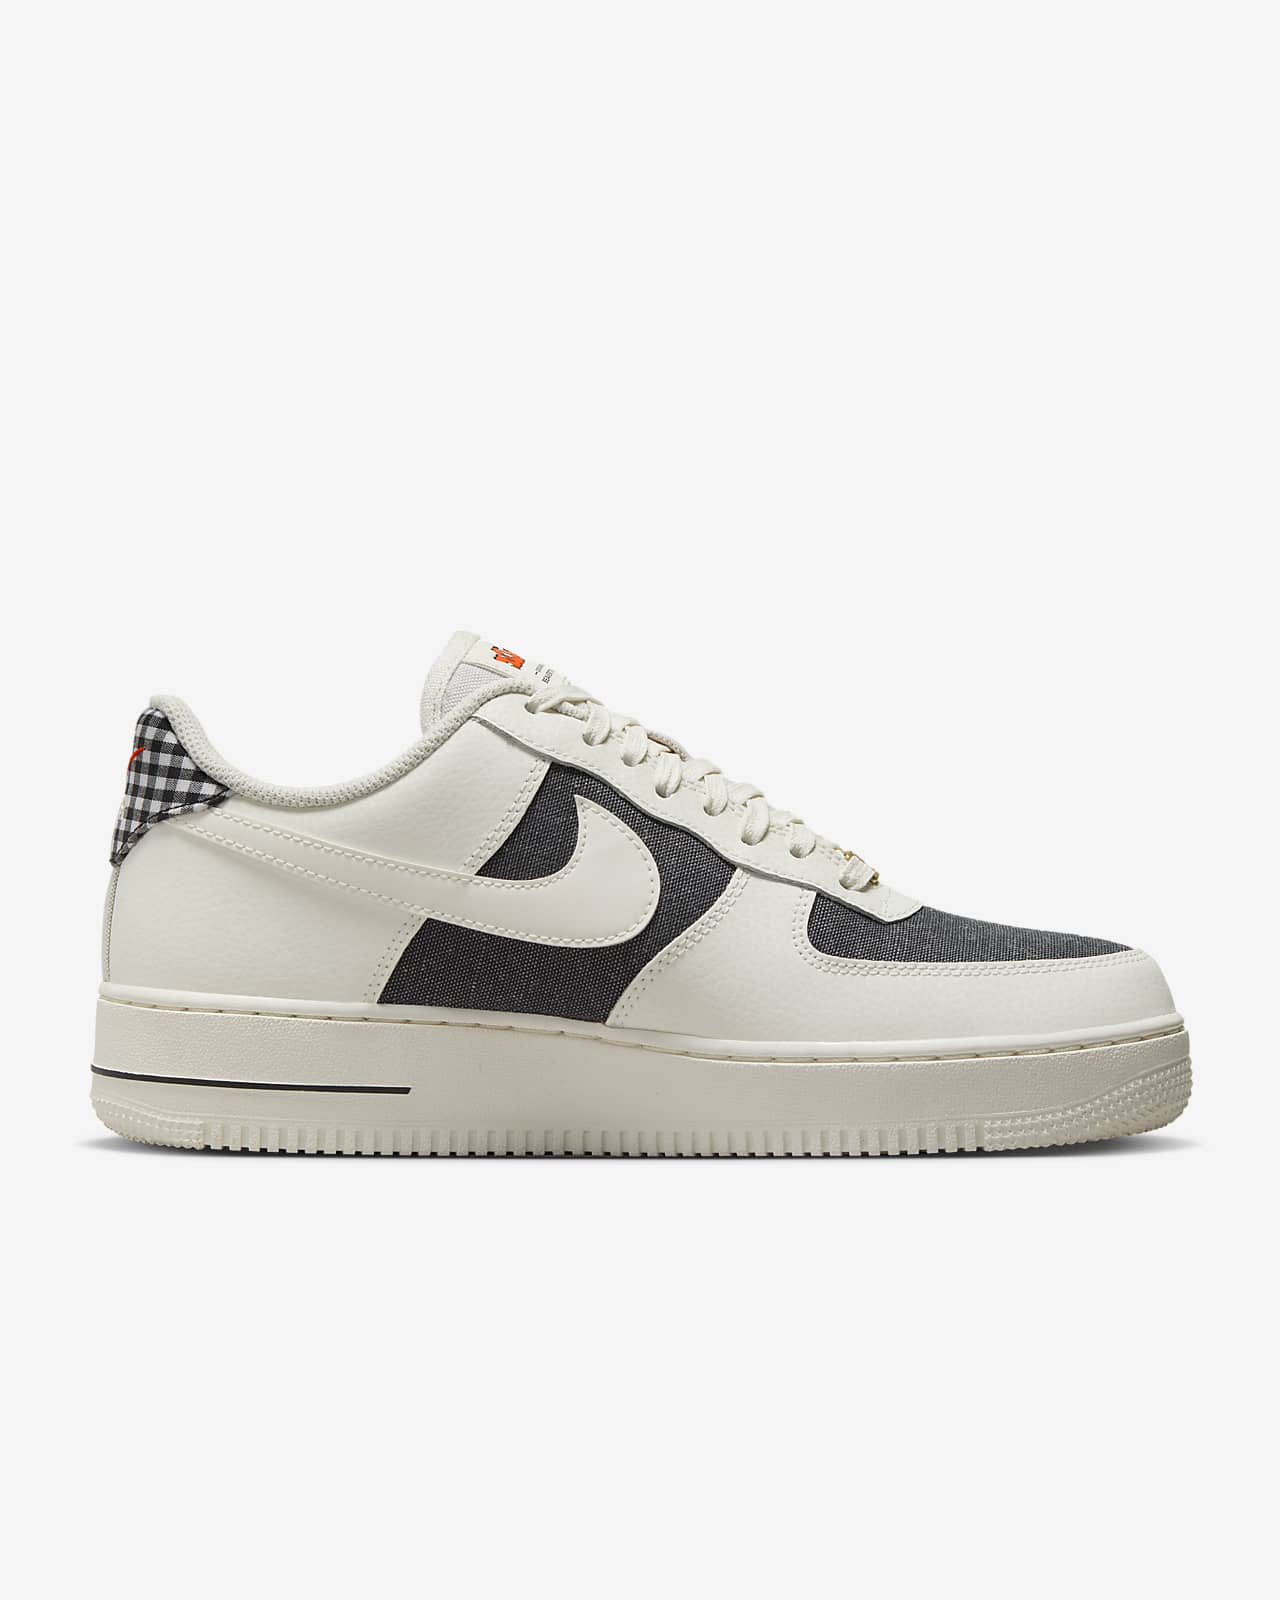 Nike Men's Air Force 1 '07 Basketball Shoes 